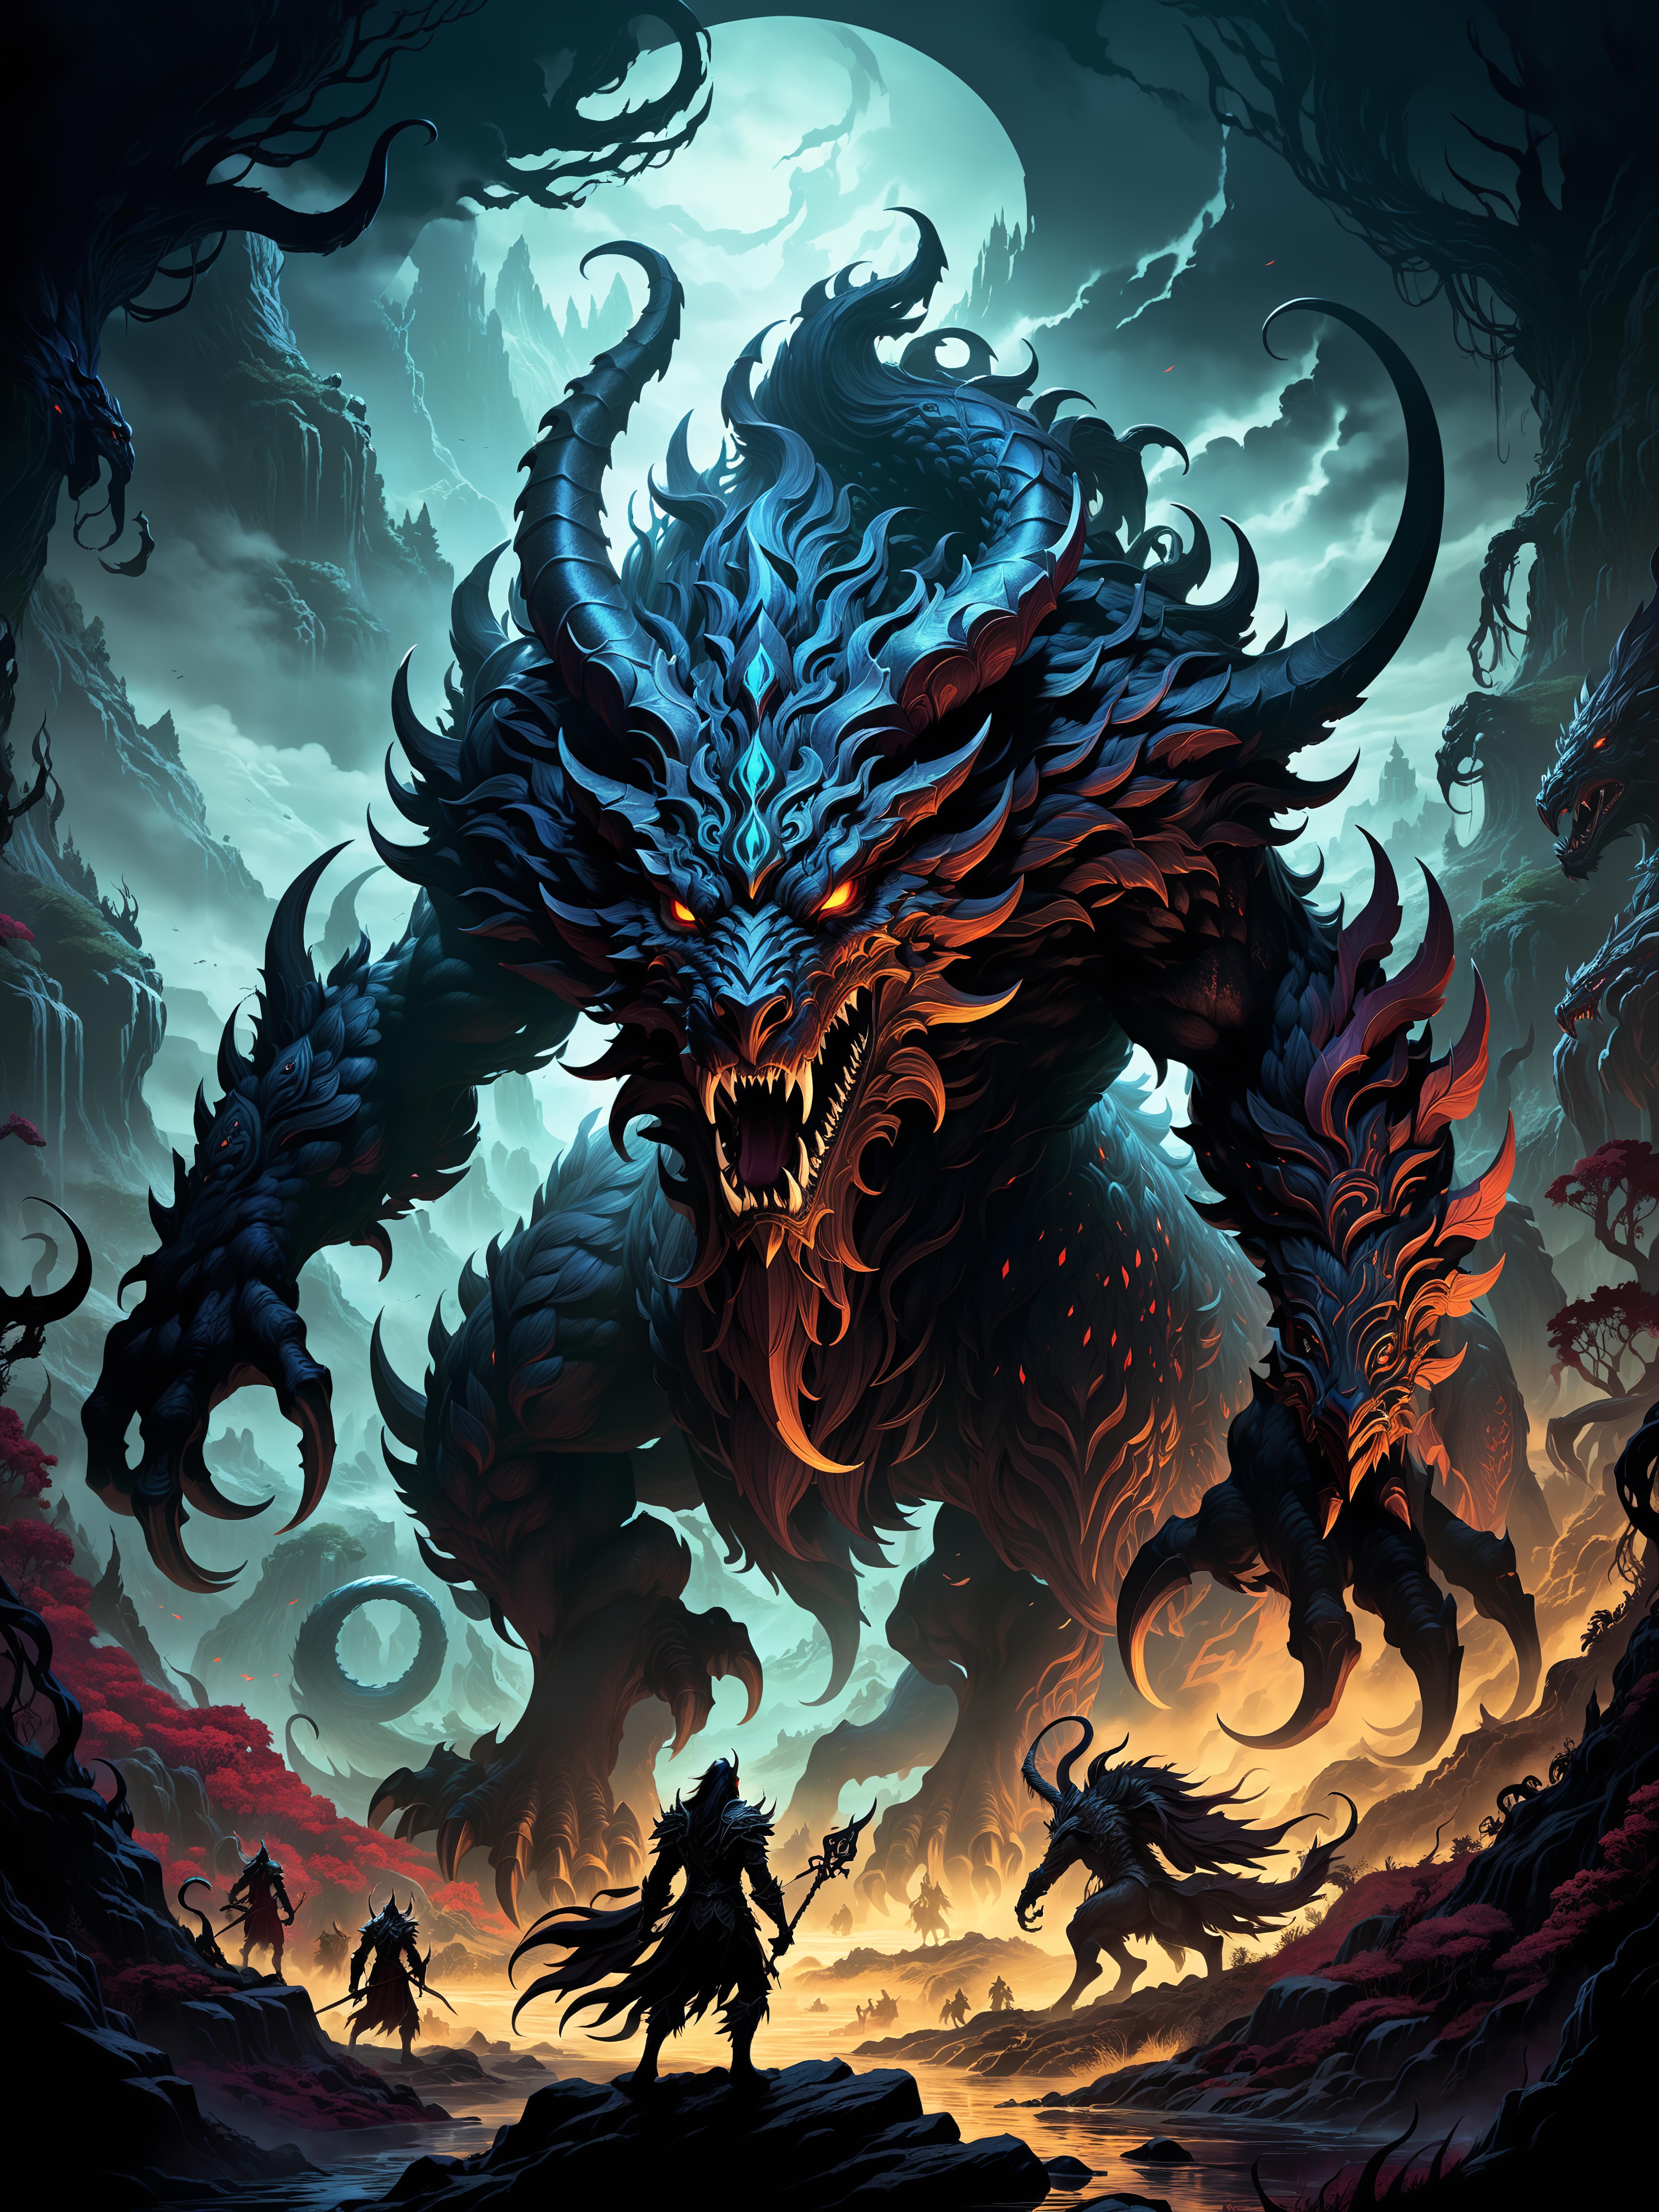 Black and red dragon with horns and sharp teeth, surrounded by other dragons.